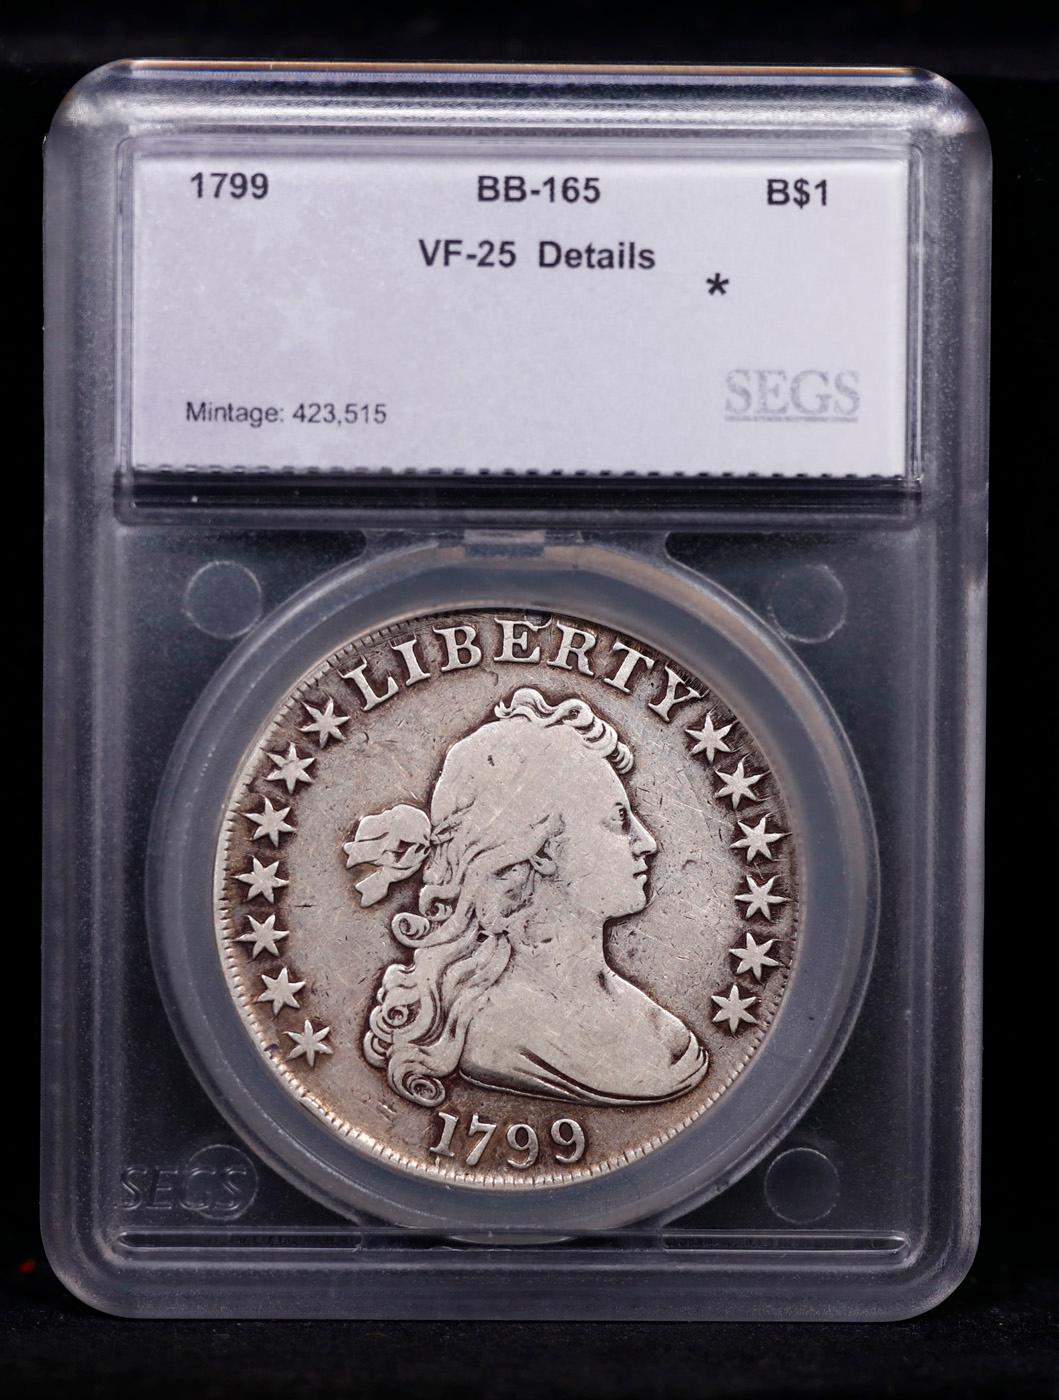 ***Auction Highlight*** 1799 Draped Bust Dollar BB-165 $1 Graded vf25 details By SEGS (fc)